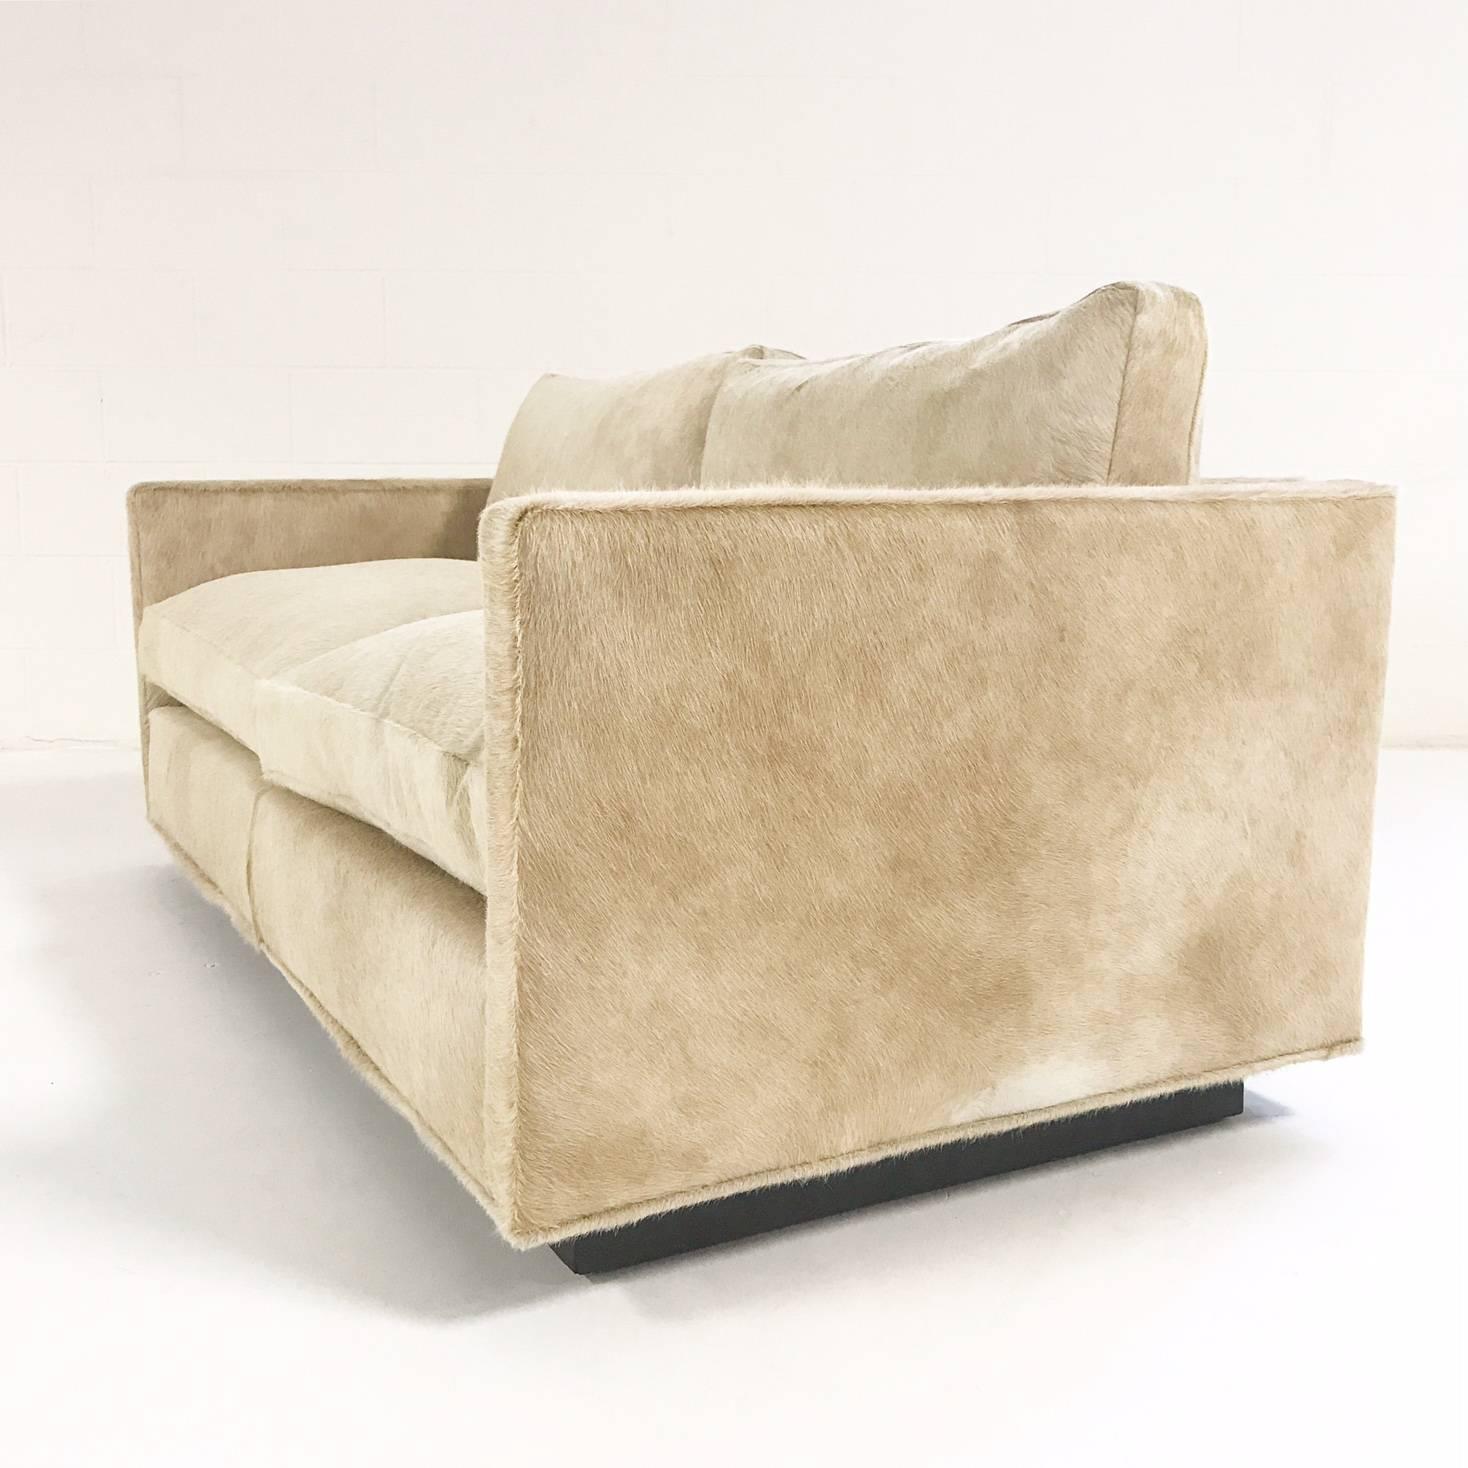 One of a kind Milo Baughman for Thayer Coggin loveseat restored in Brazilian cowhide

The lines, so simple.
The cushions, so squishy.
Brought back to life,
This loveseat, so fishy.

Paramount to Baughman's design philosophy was that Good